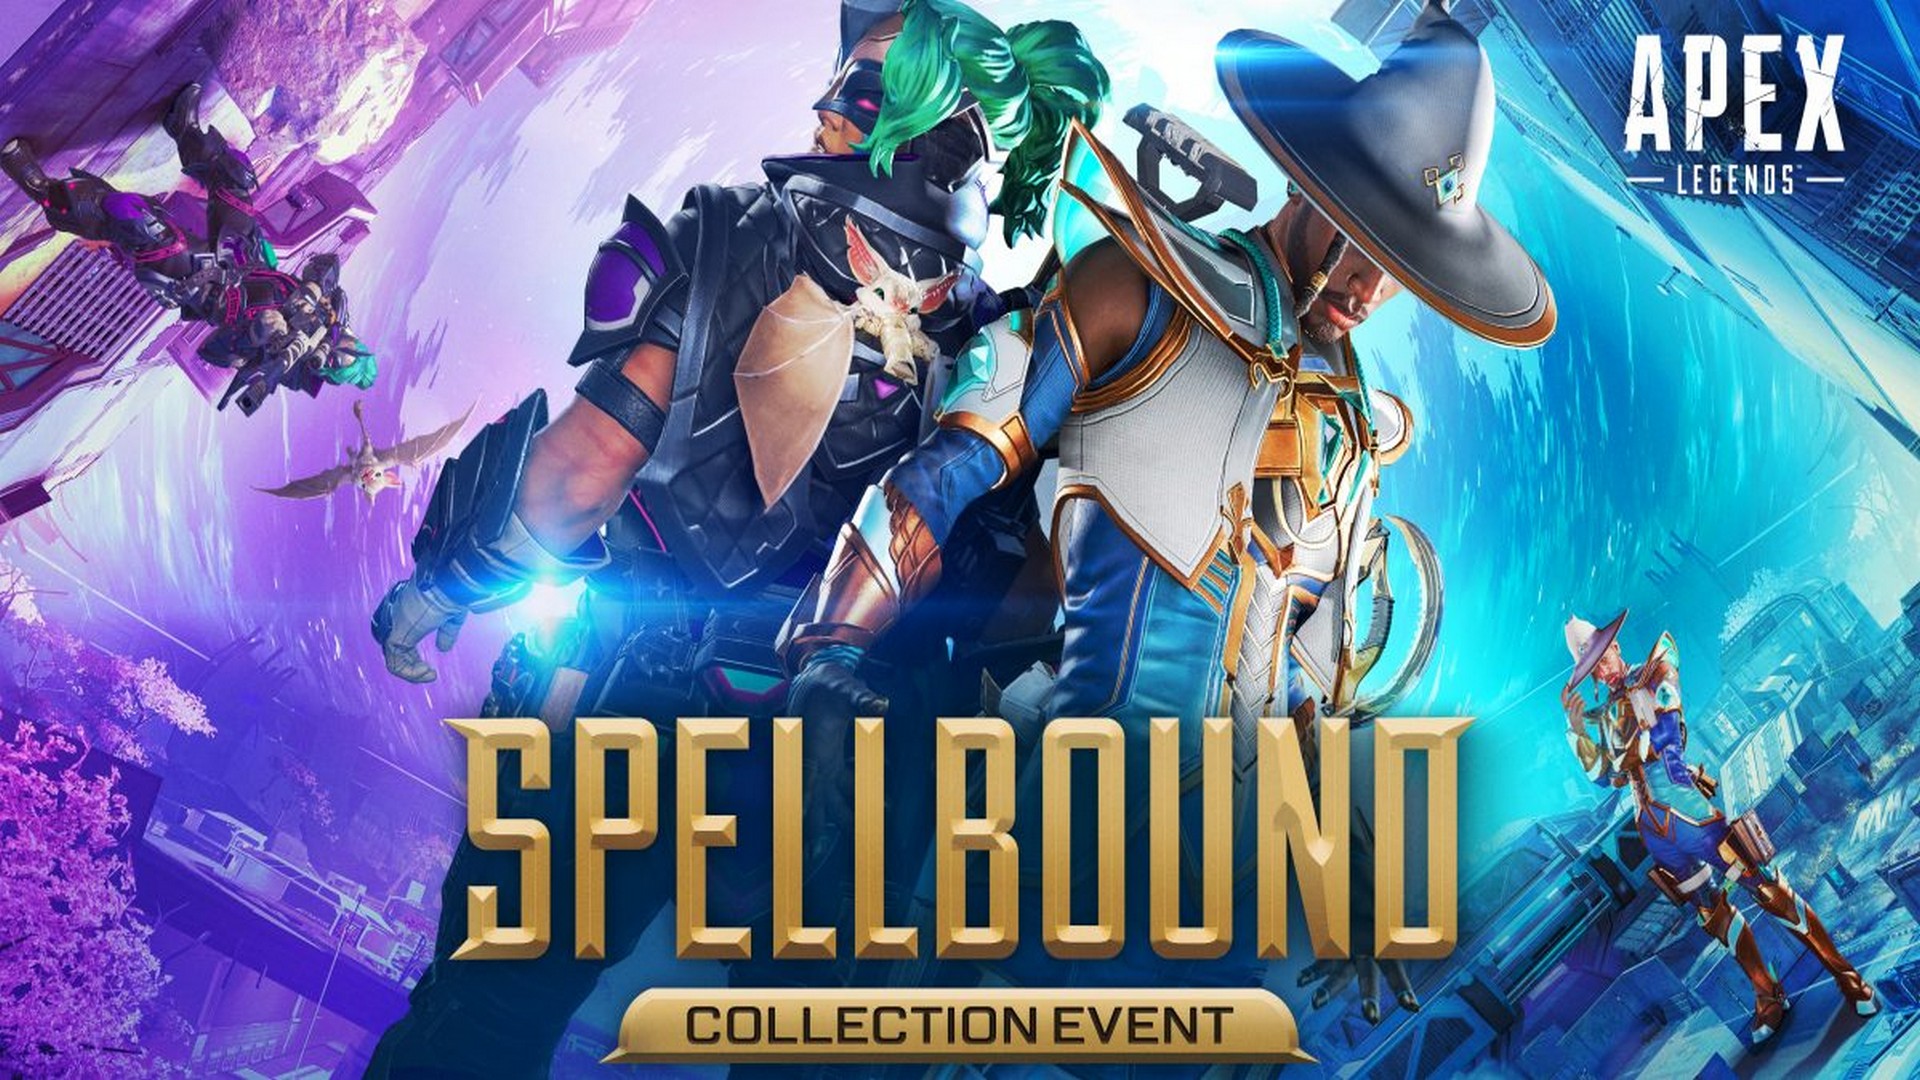 Apex Legends Spellbound Collection Event – January 11 – January 25